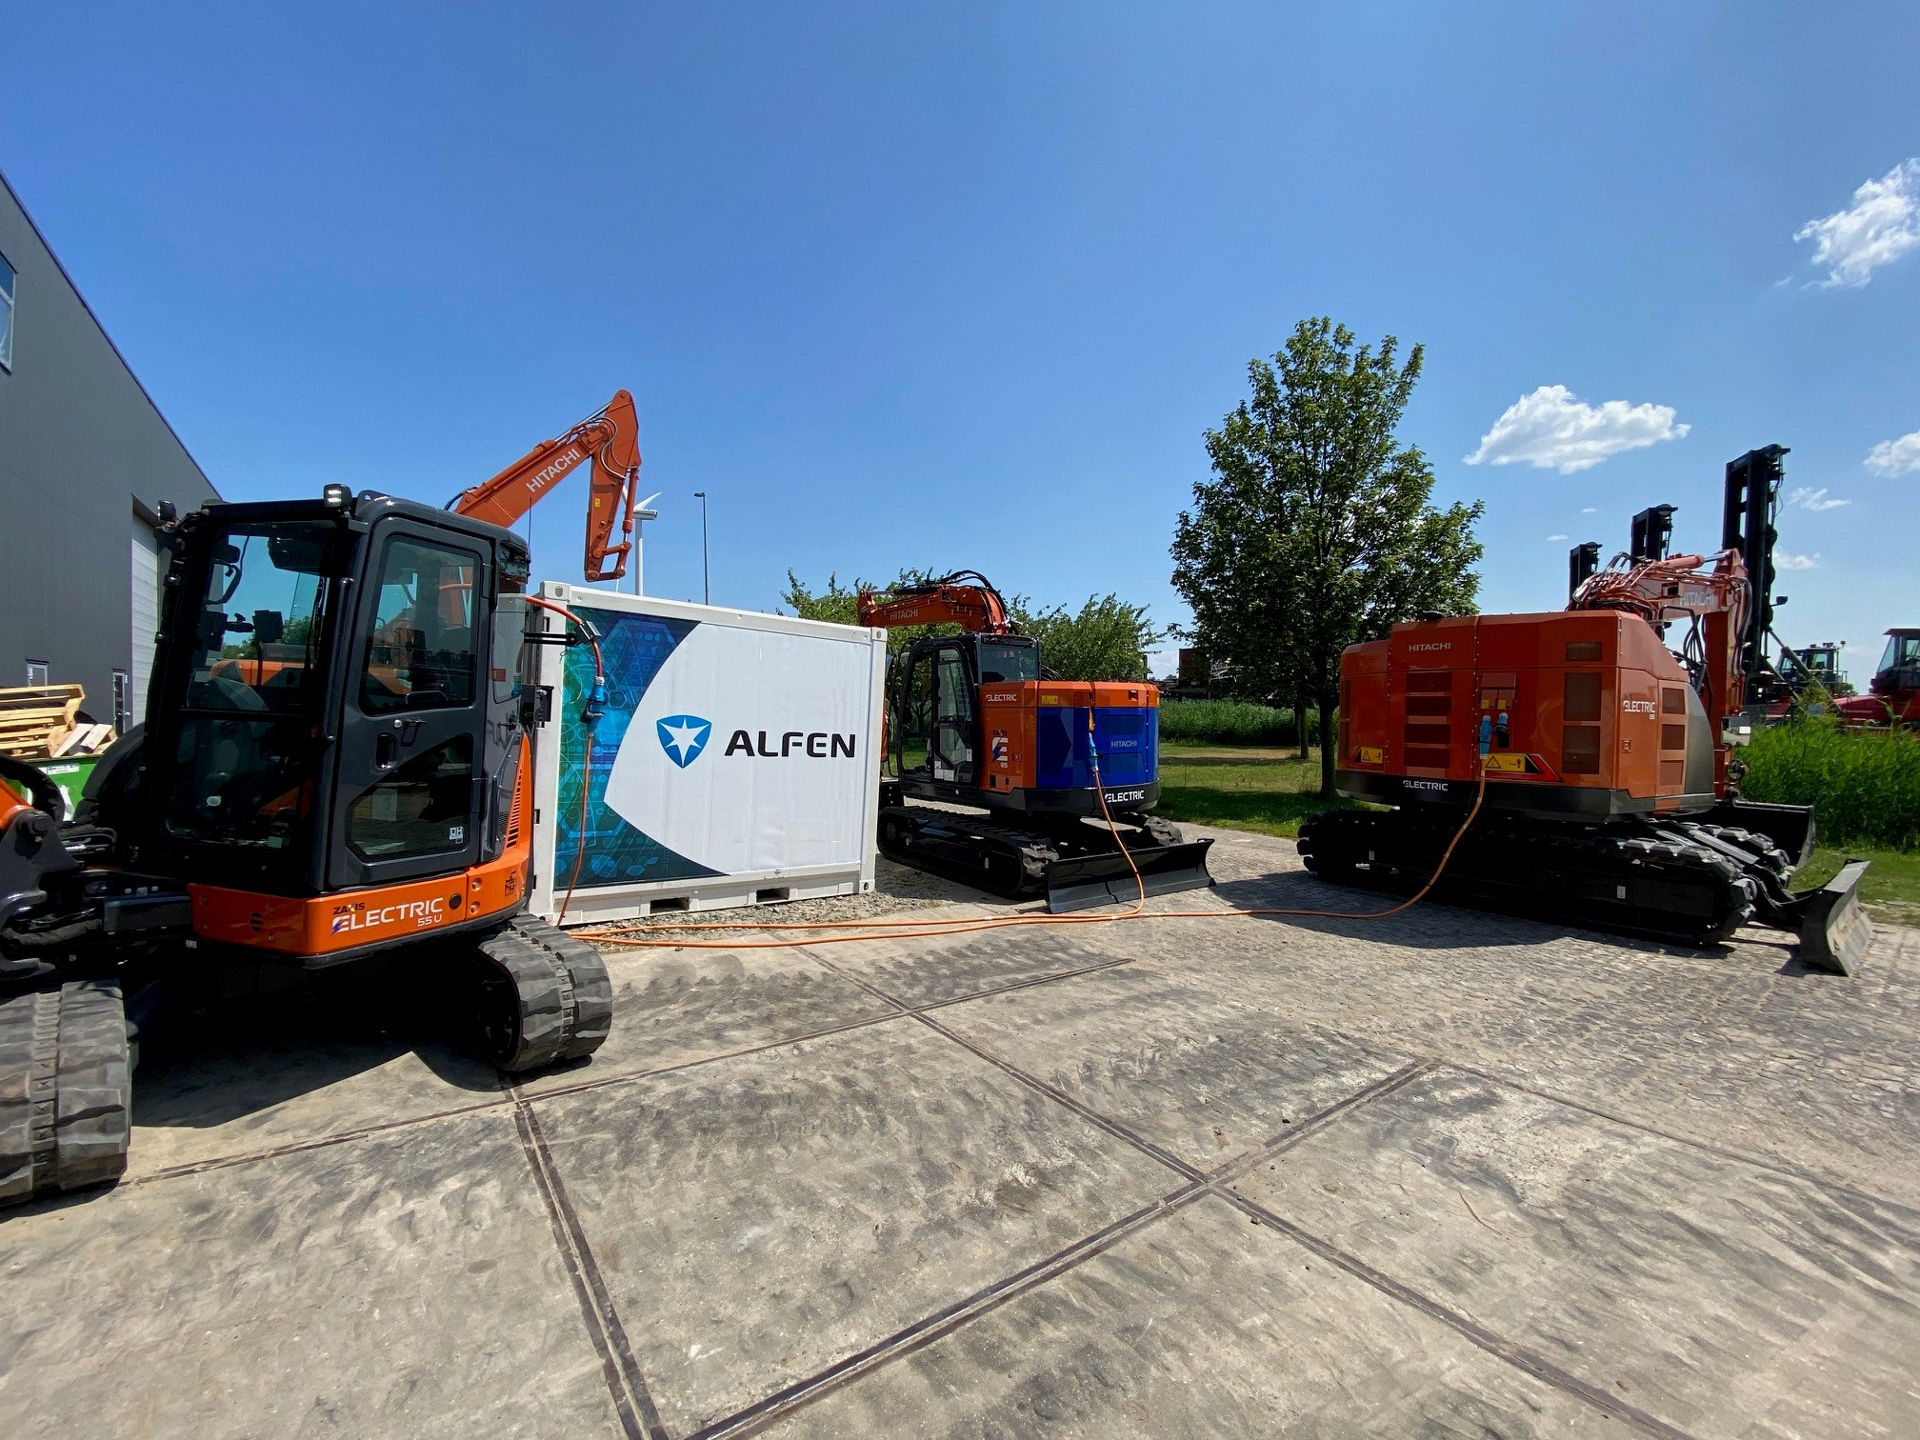 Hitachi Construction Machinery's battery-driven excavators  powered by Alfen's mobile energy storage system